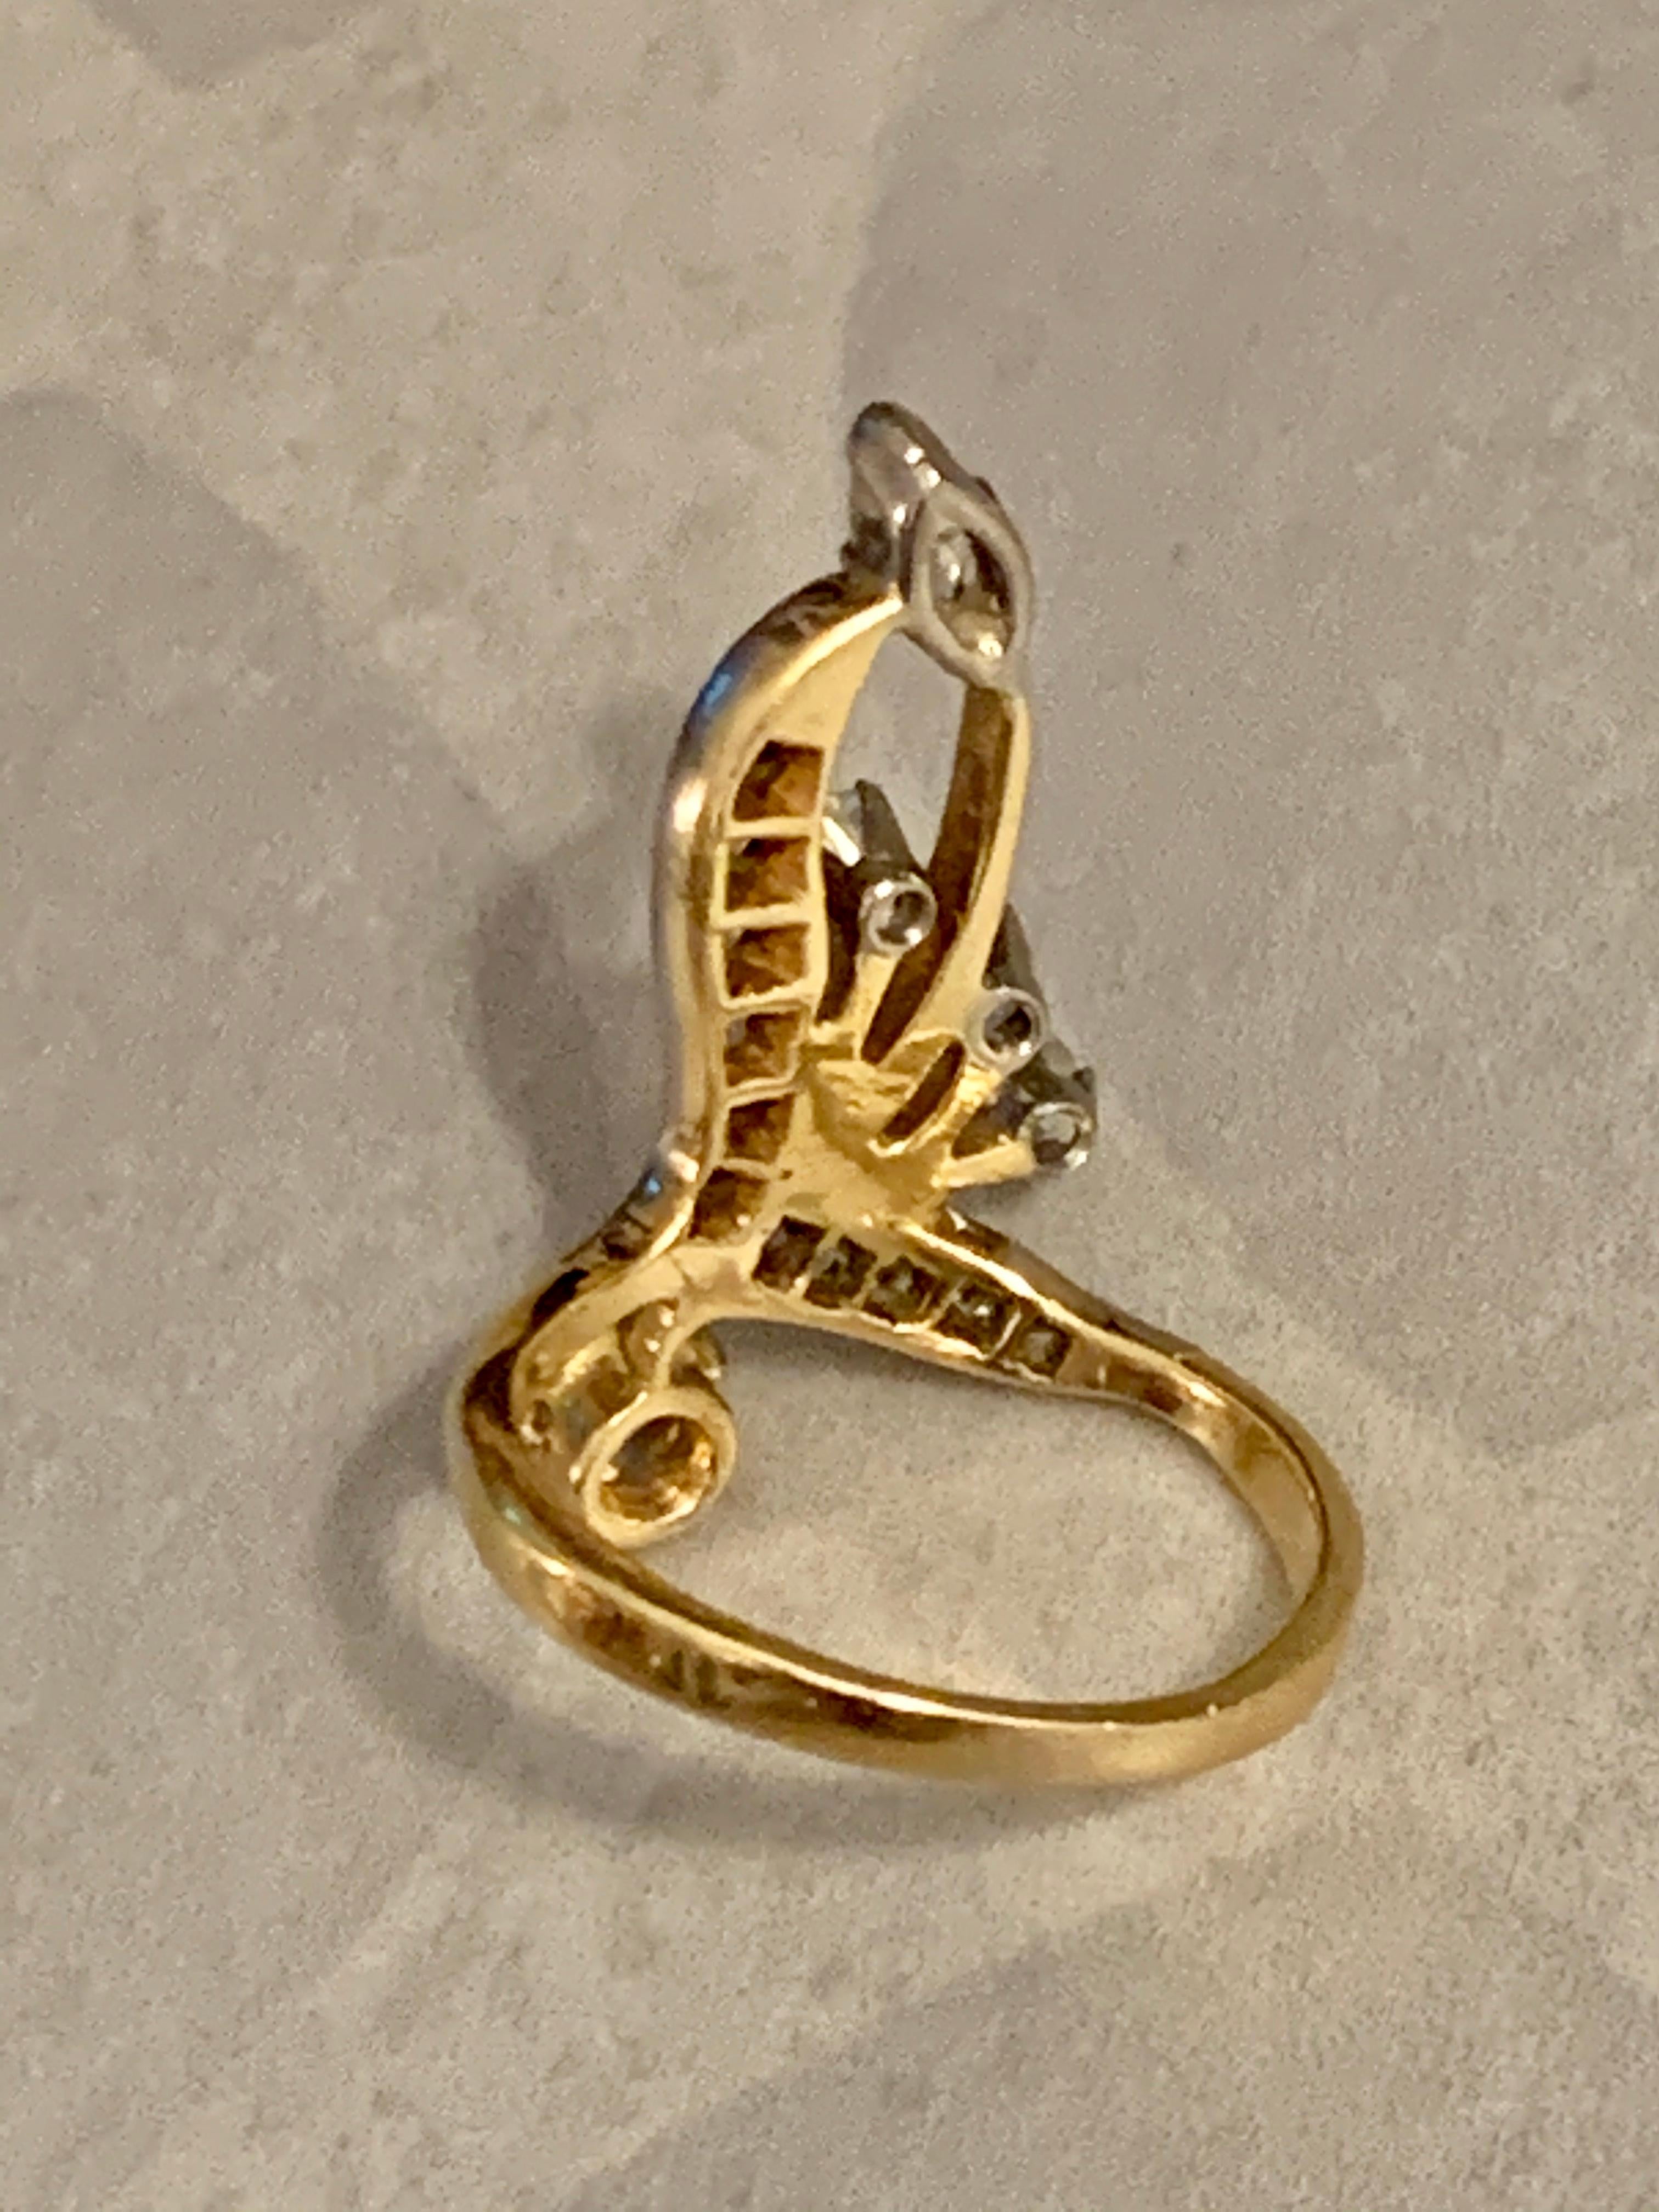 Vintage Diamond Platinum and 18 Karat Yellow Gold Fashion Ring In Good Condition For Sale In St. Louis Park, MN